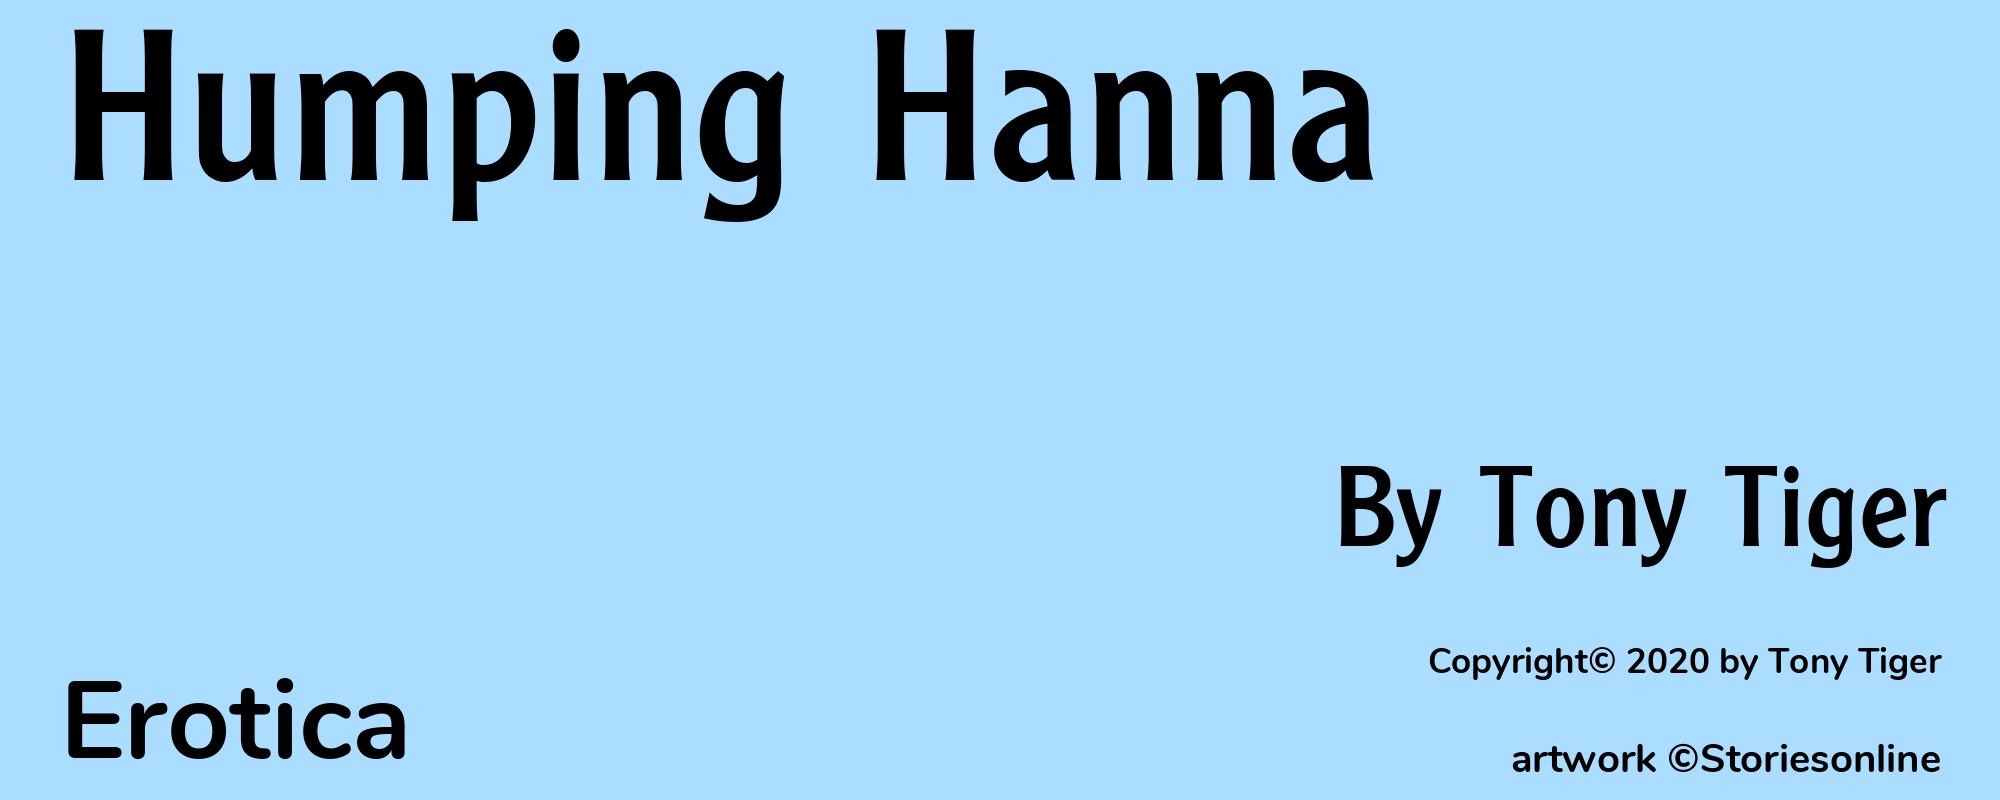 Humping Hanna - Cover